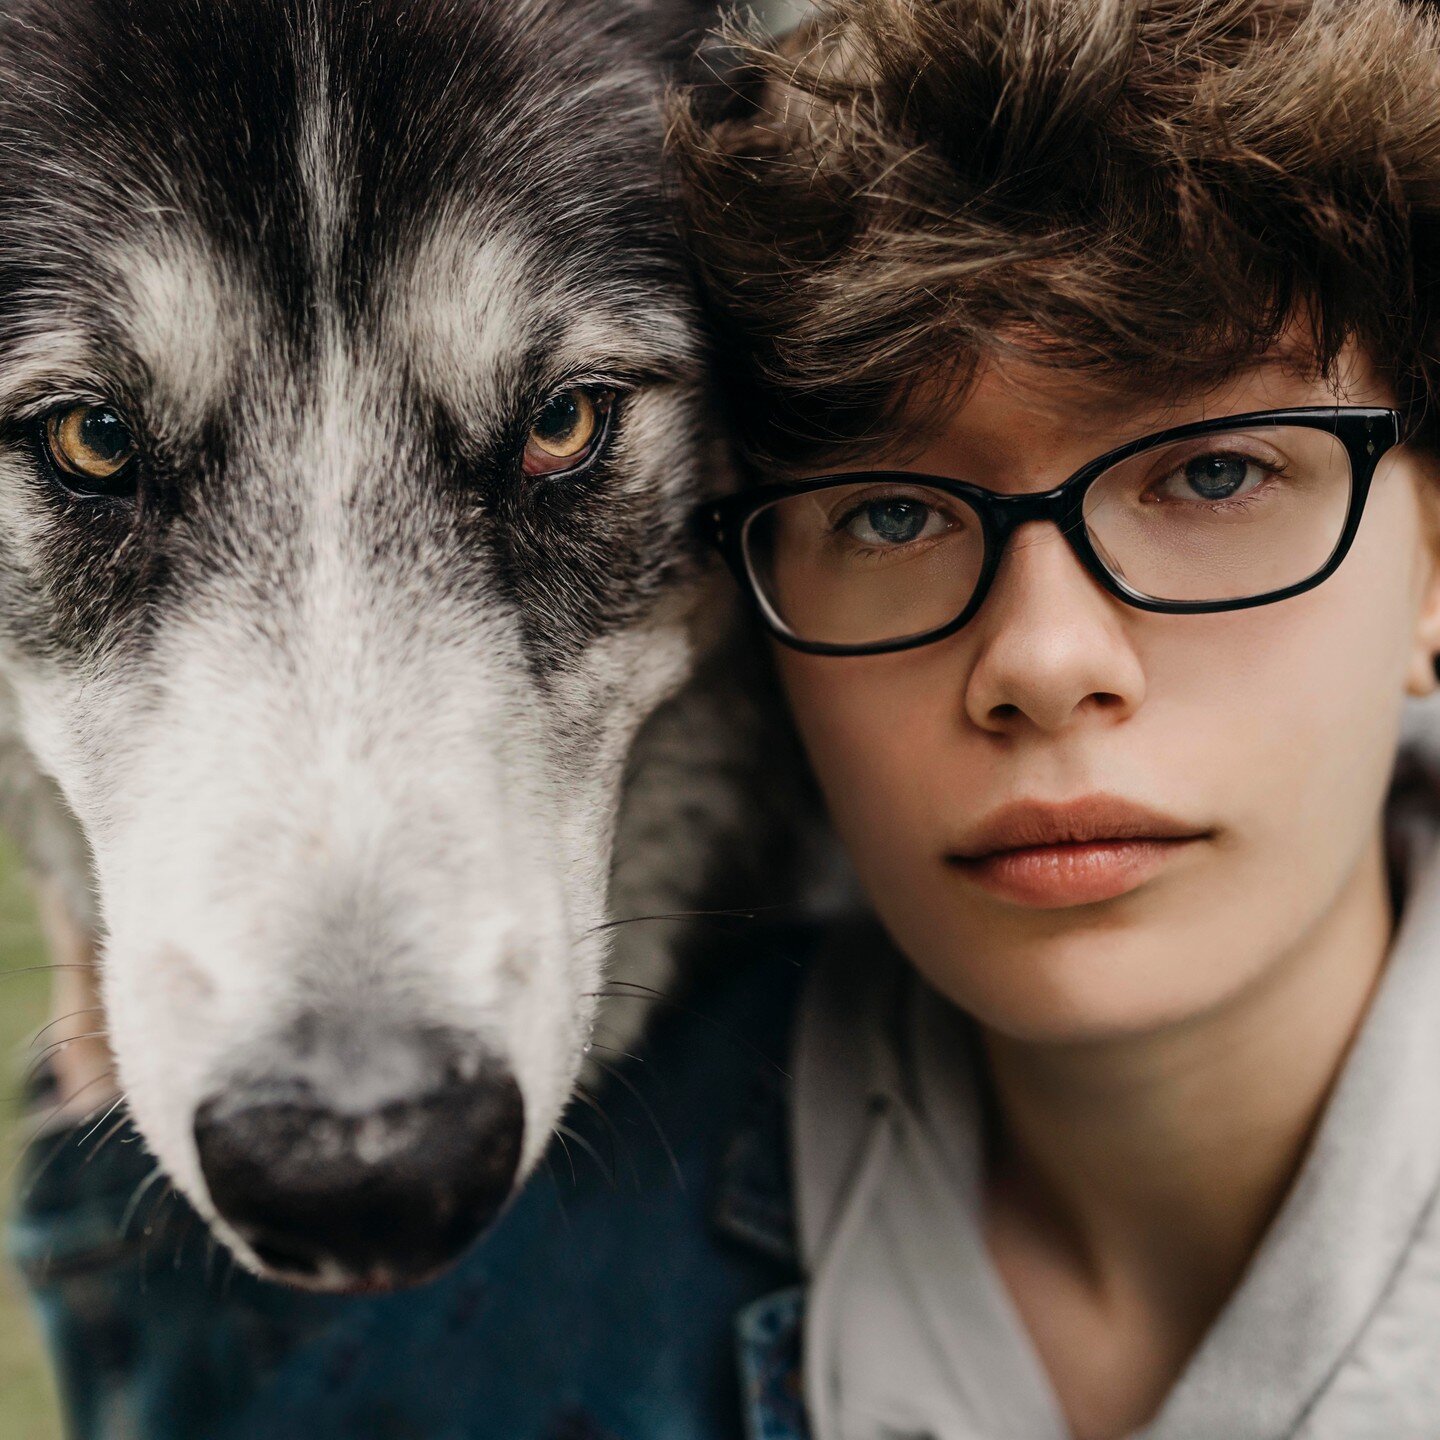 I never thought I could add &quot;Photoshoot with a wolf dog&quot; to my resume but here we are! 

Olivia is a 2023 graduate and, while booking her session, mentioned she'd be interested in including a wolf dog in her shoot if possible. Would you bel